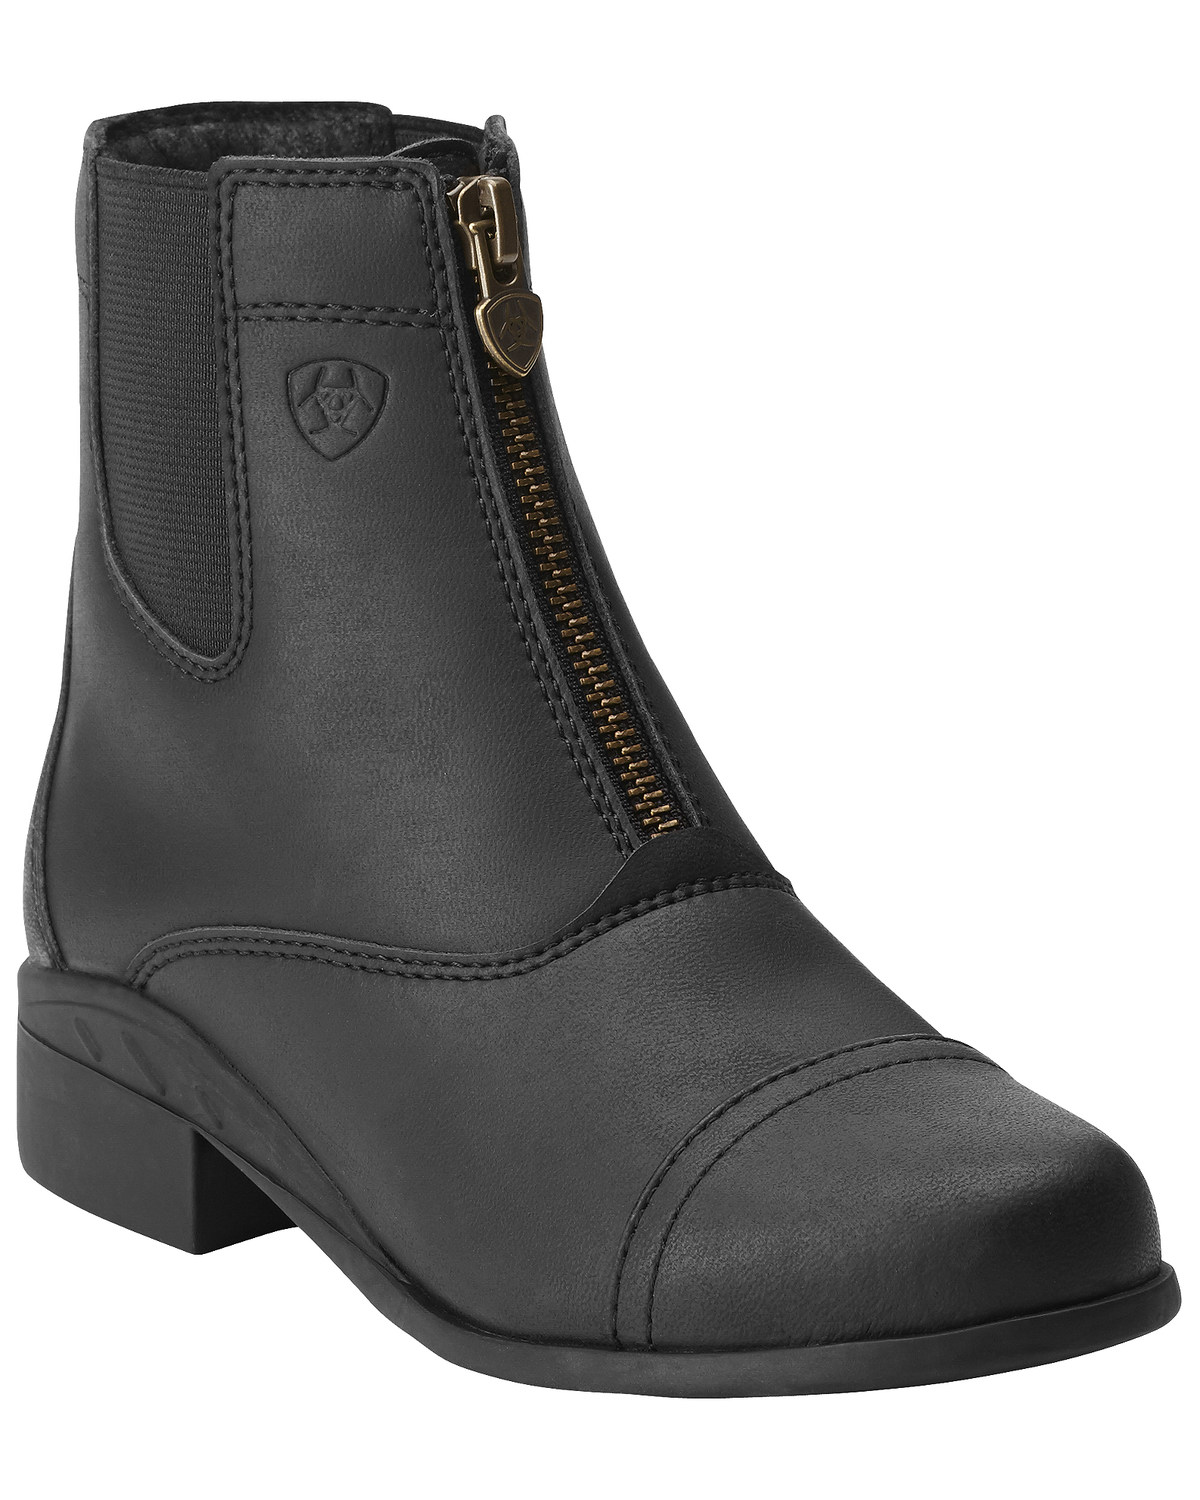 Ariat Kids' Scout Paddock Boots